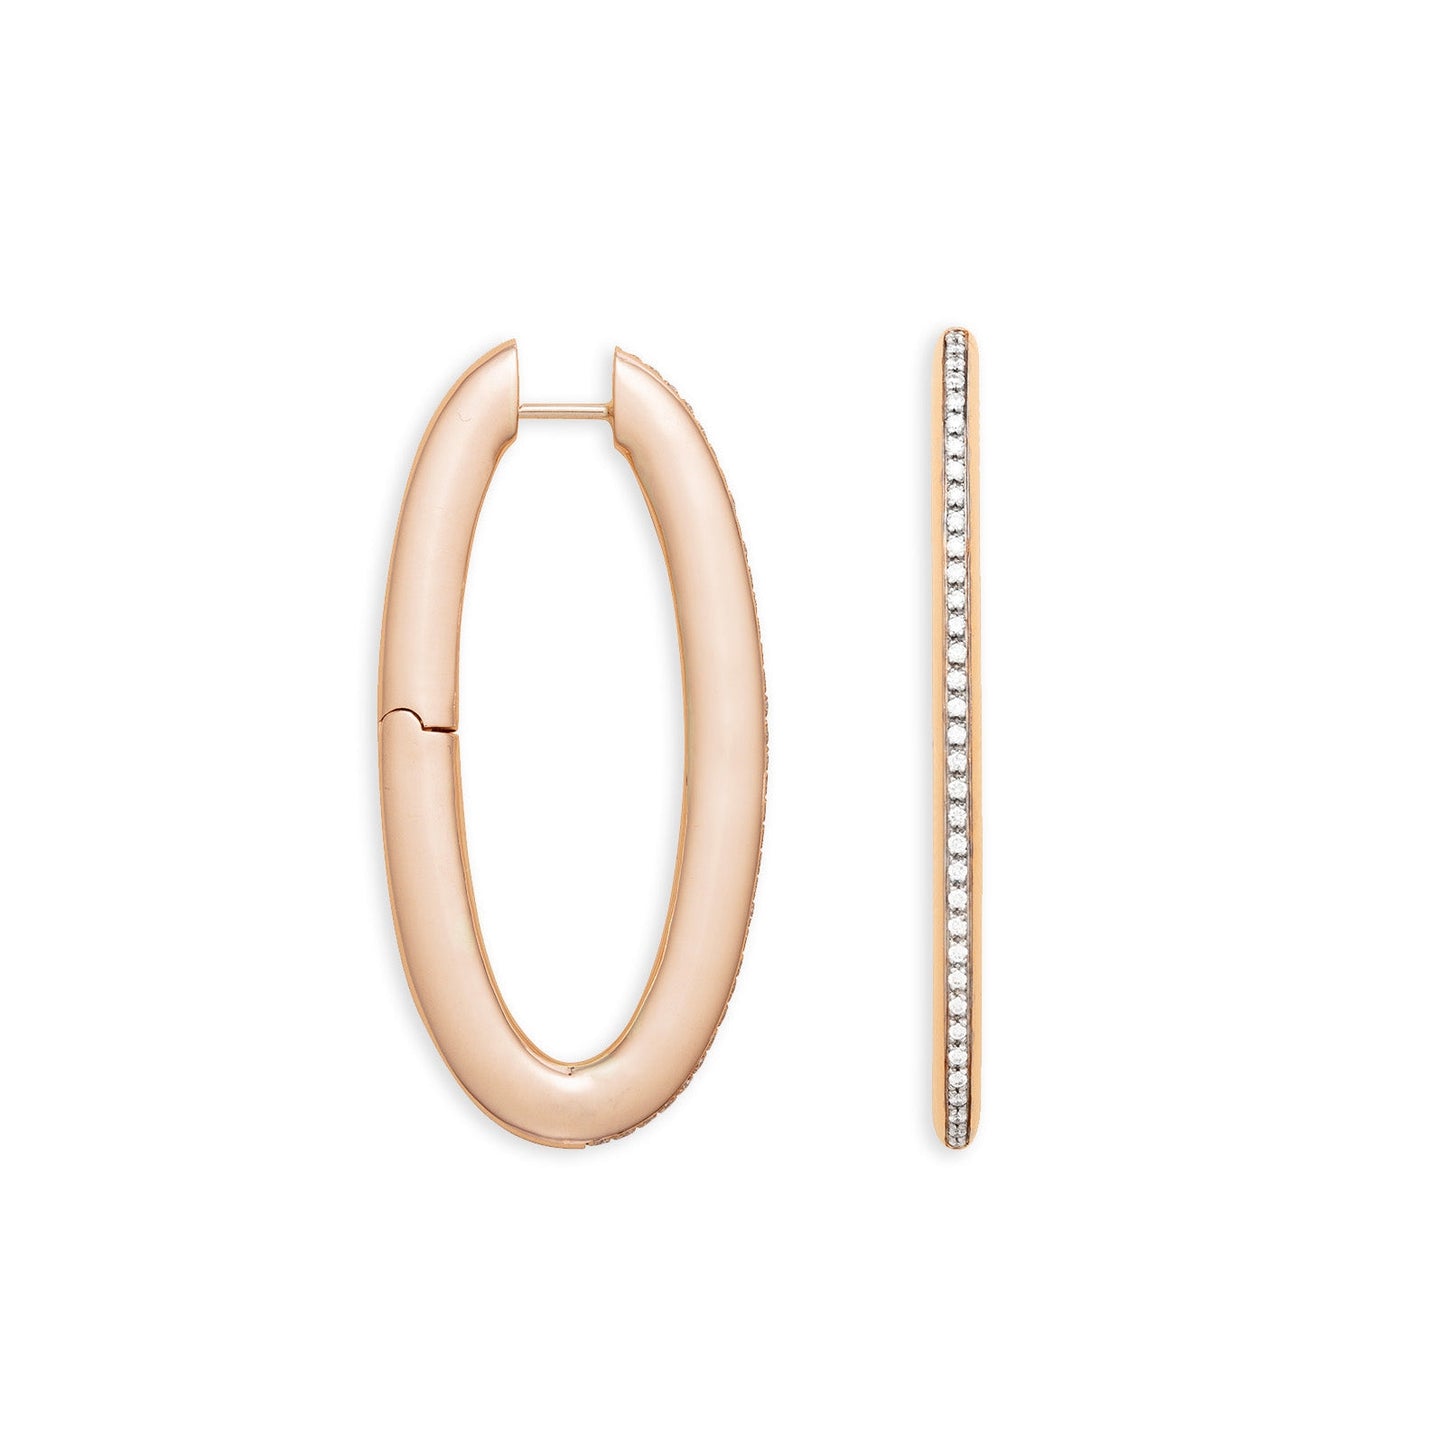 SUNSET "LIBERA ICON" BIG ROSE GOLD OVAL HOOP EARRINGS WITH DIAMONDS